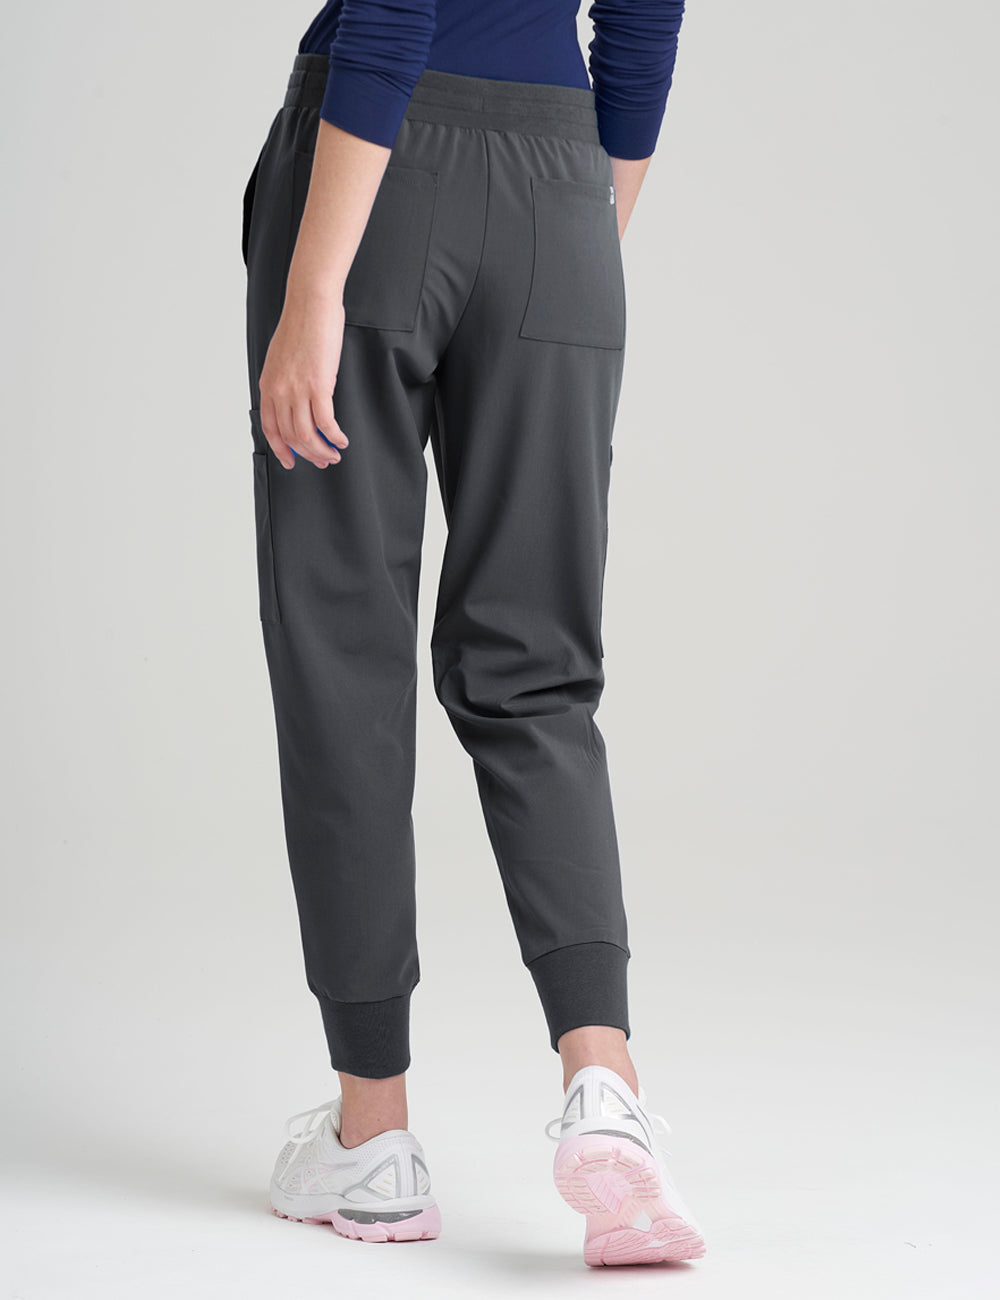 Balance Pocket Joggers for Tall Women in Bright Navy